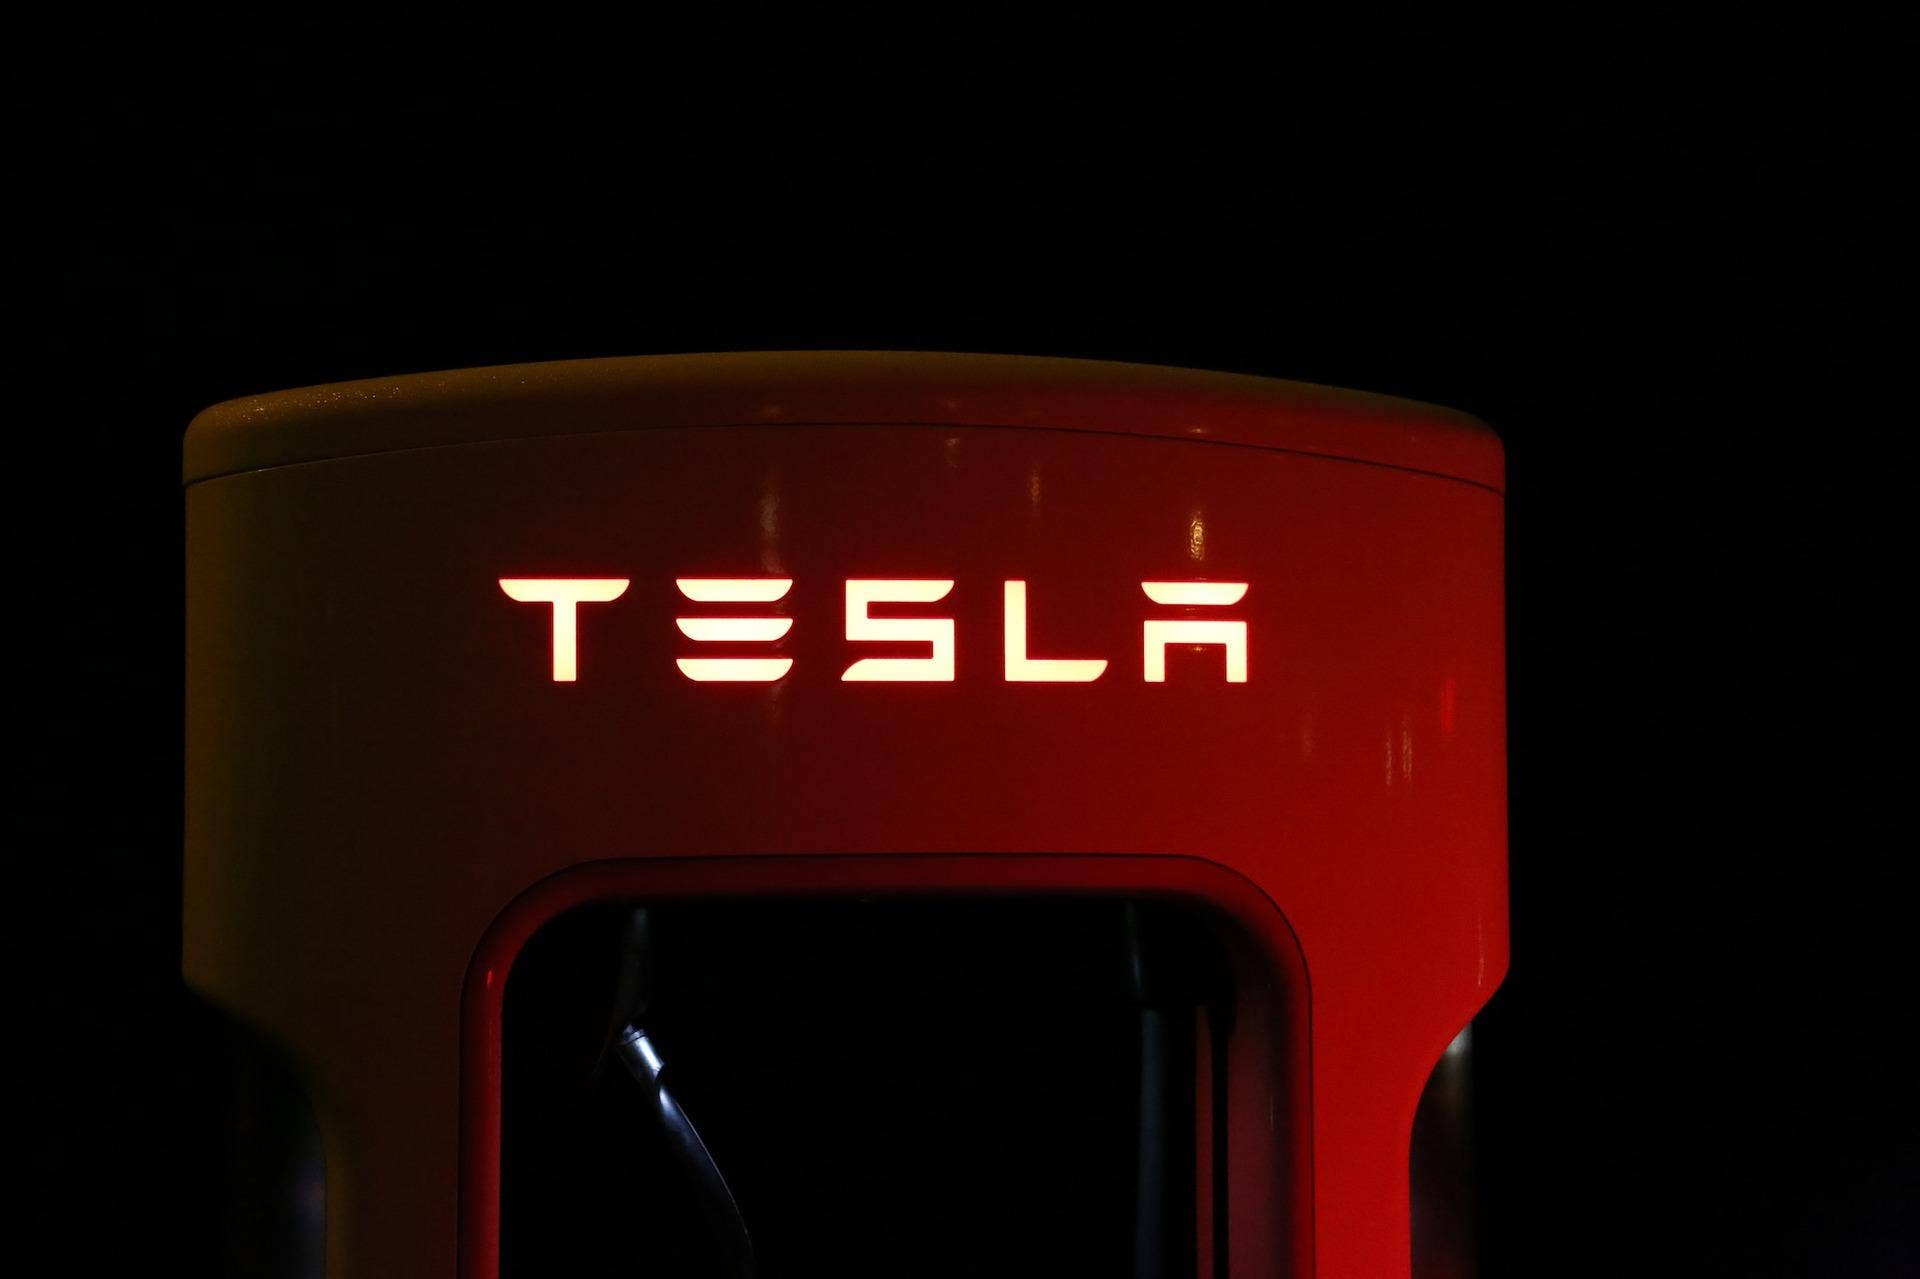 Tesla Investors Should Vote Against 2 Directors, Proxy Advisory Firm ISS Recommends